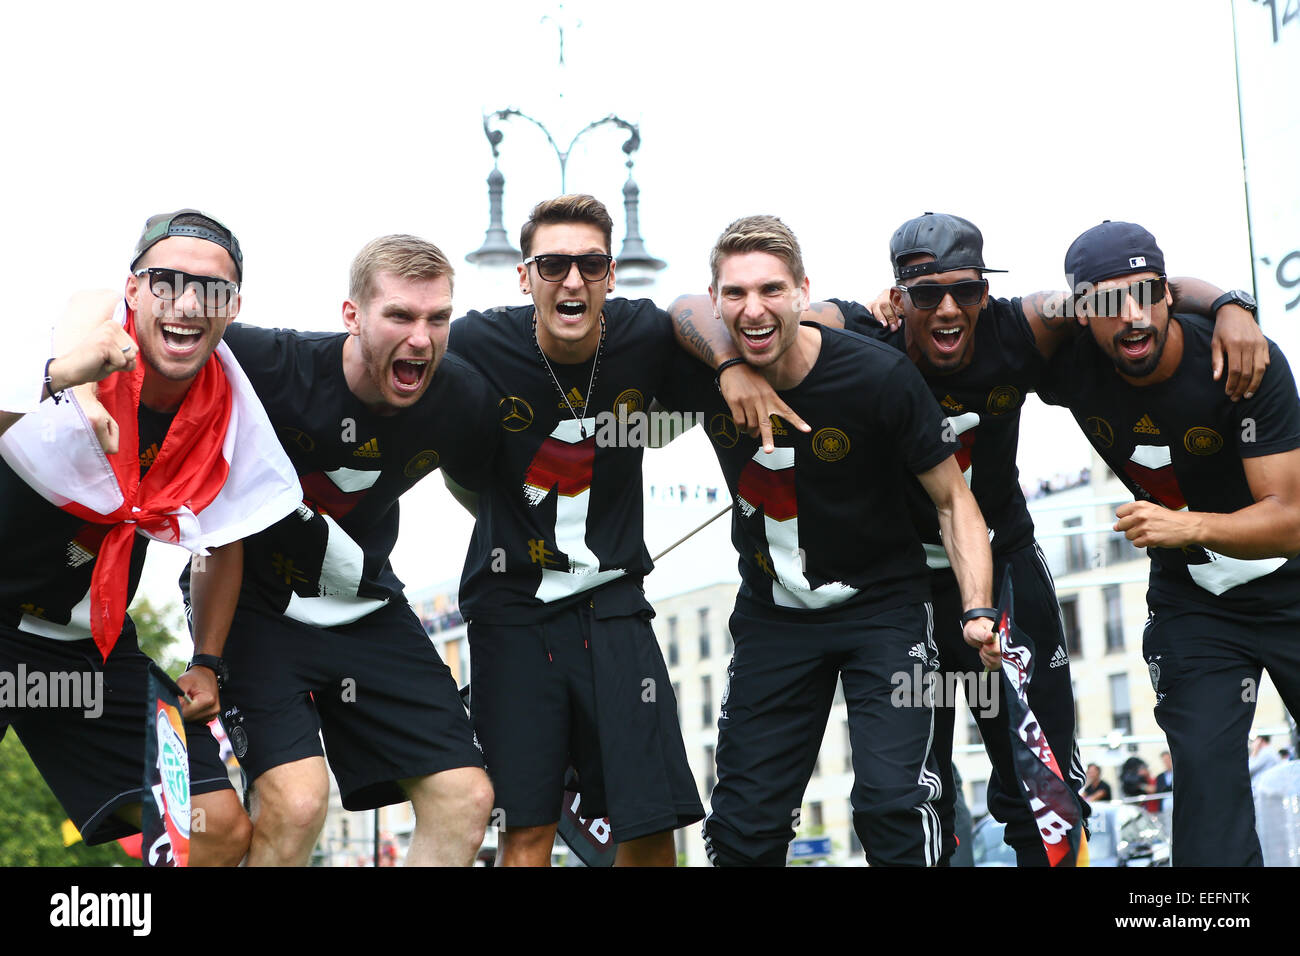 The Germany national football team celebrating their victory at Brandenburg Gate (Brandenburger Tor). 400,000 fans gathered at the so called Fanmeile to greet the winners of the 2014 World Cup.  Featuring: Lukas Podolski,Per Mertesacker,Ron-Robert Zieler, Stock Photo